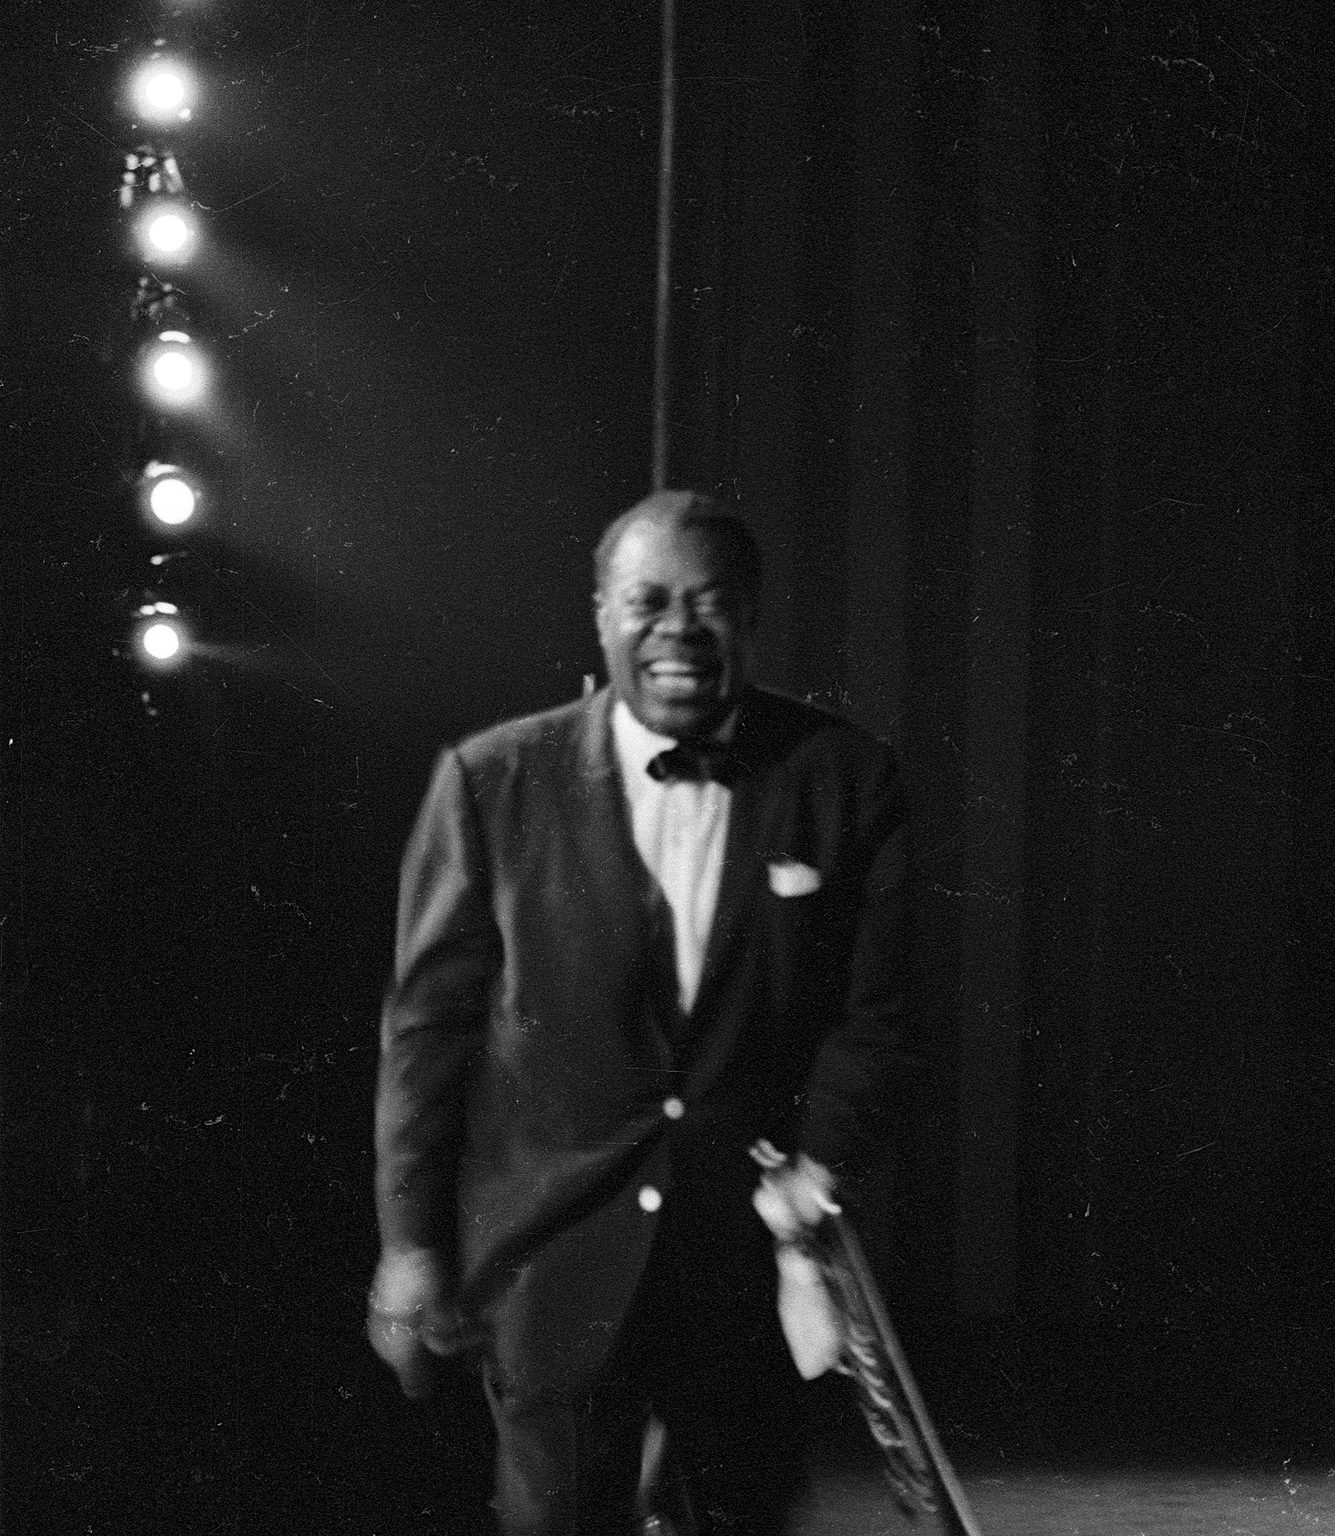 Louis Armstrong’s 'Black & Blues' review: A wealth of archival footage gives us a rare portrait of jazz legend Louis Armstrong.